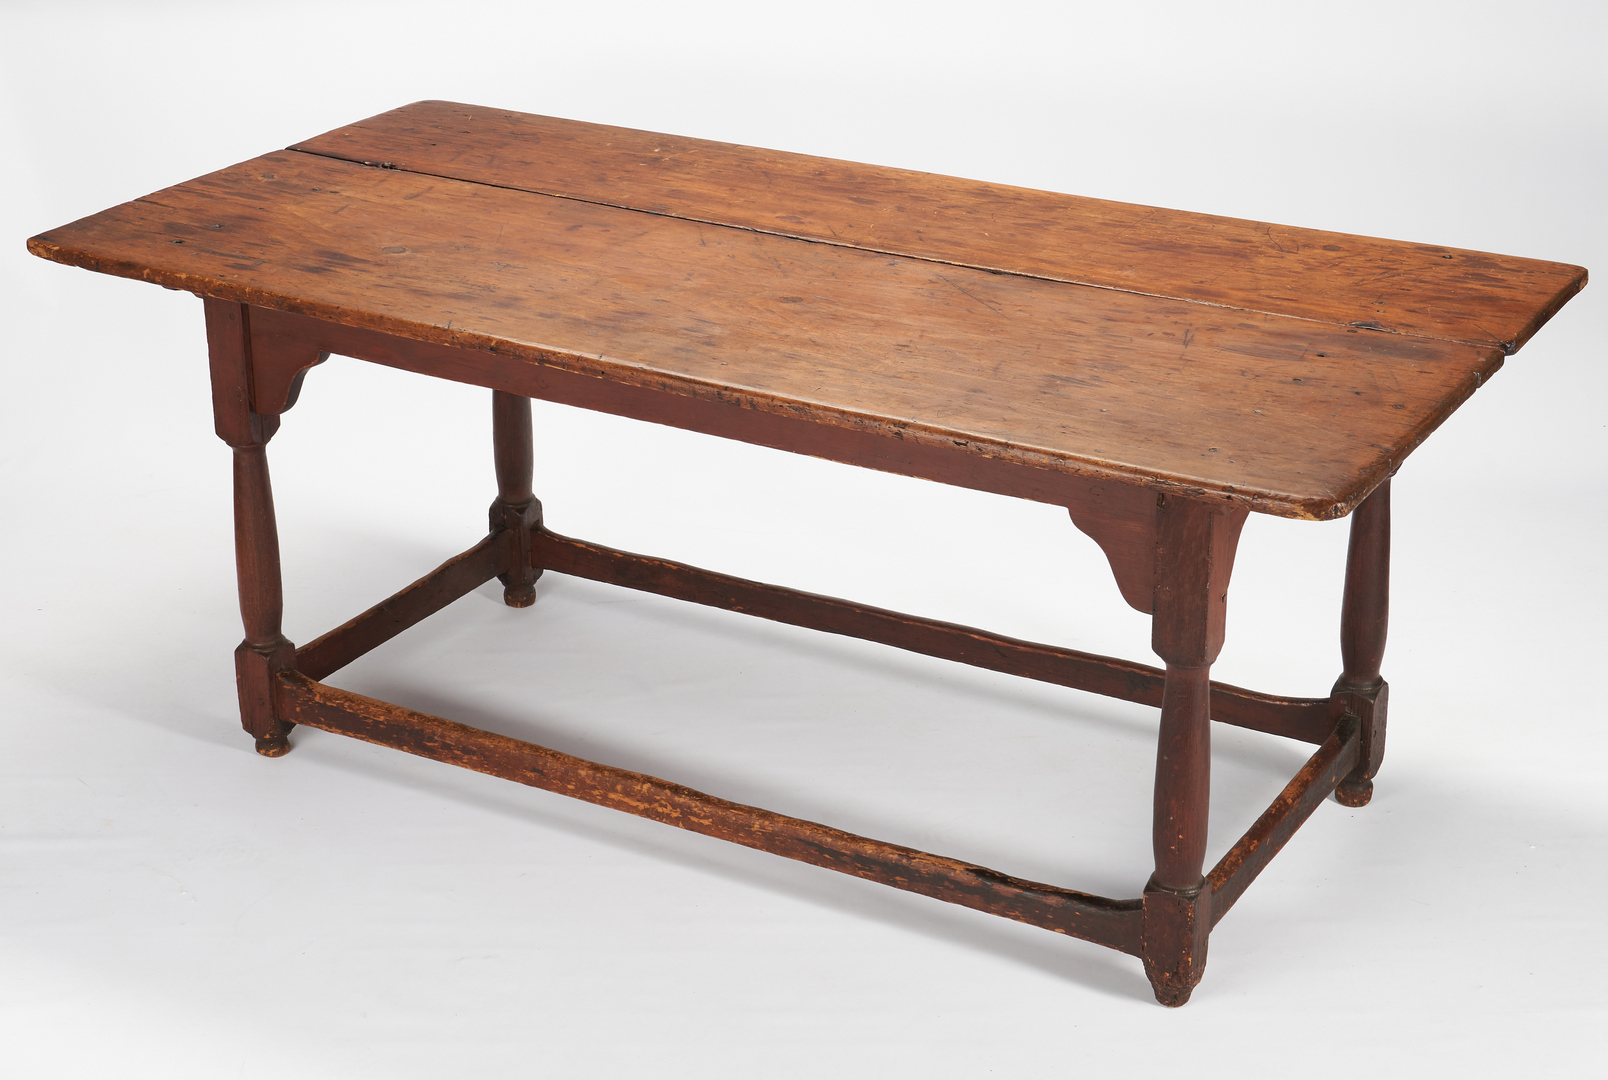 Lot 232: William and Mary Mid-Atlantic Stretcher Base Table